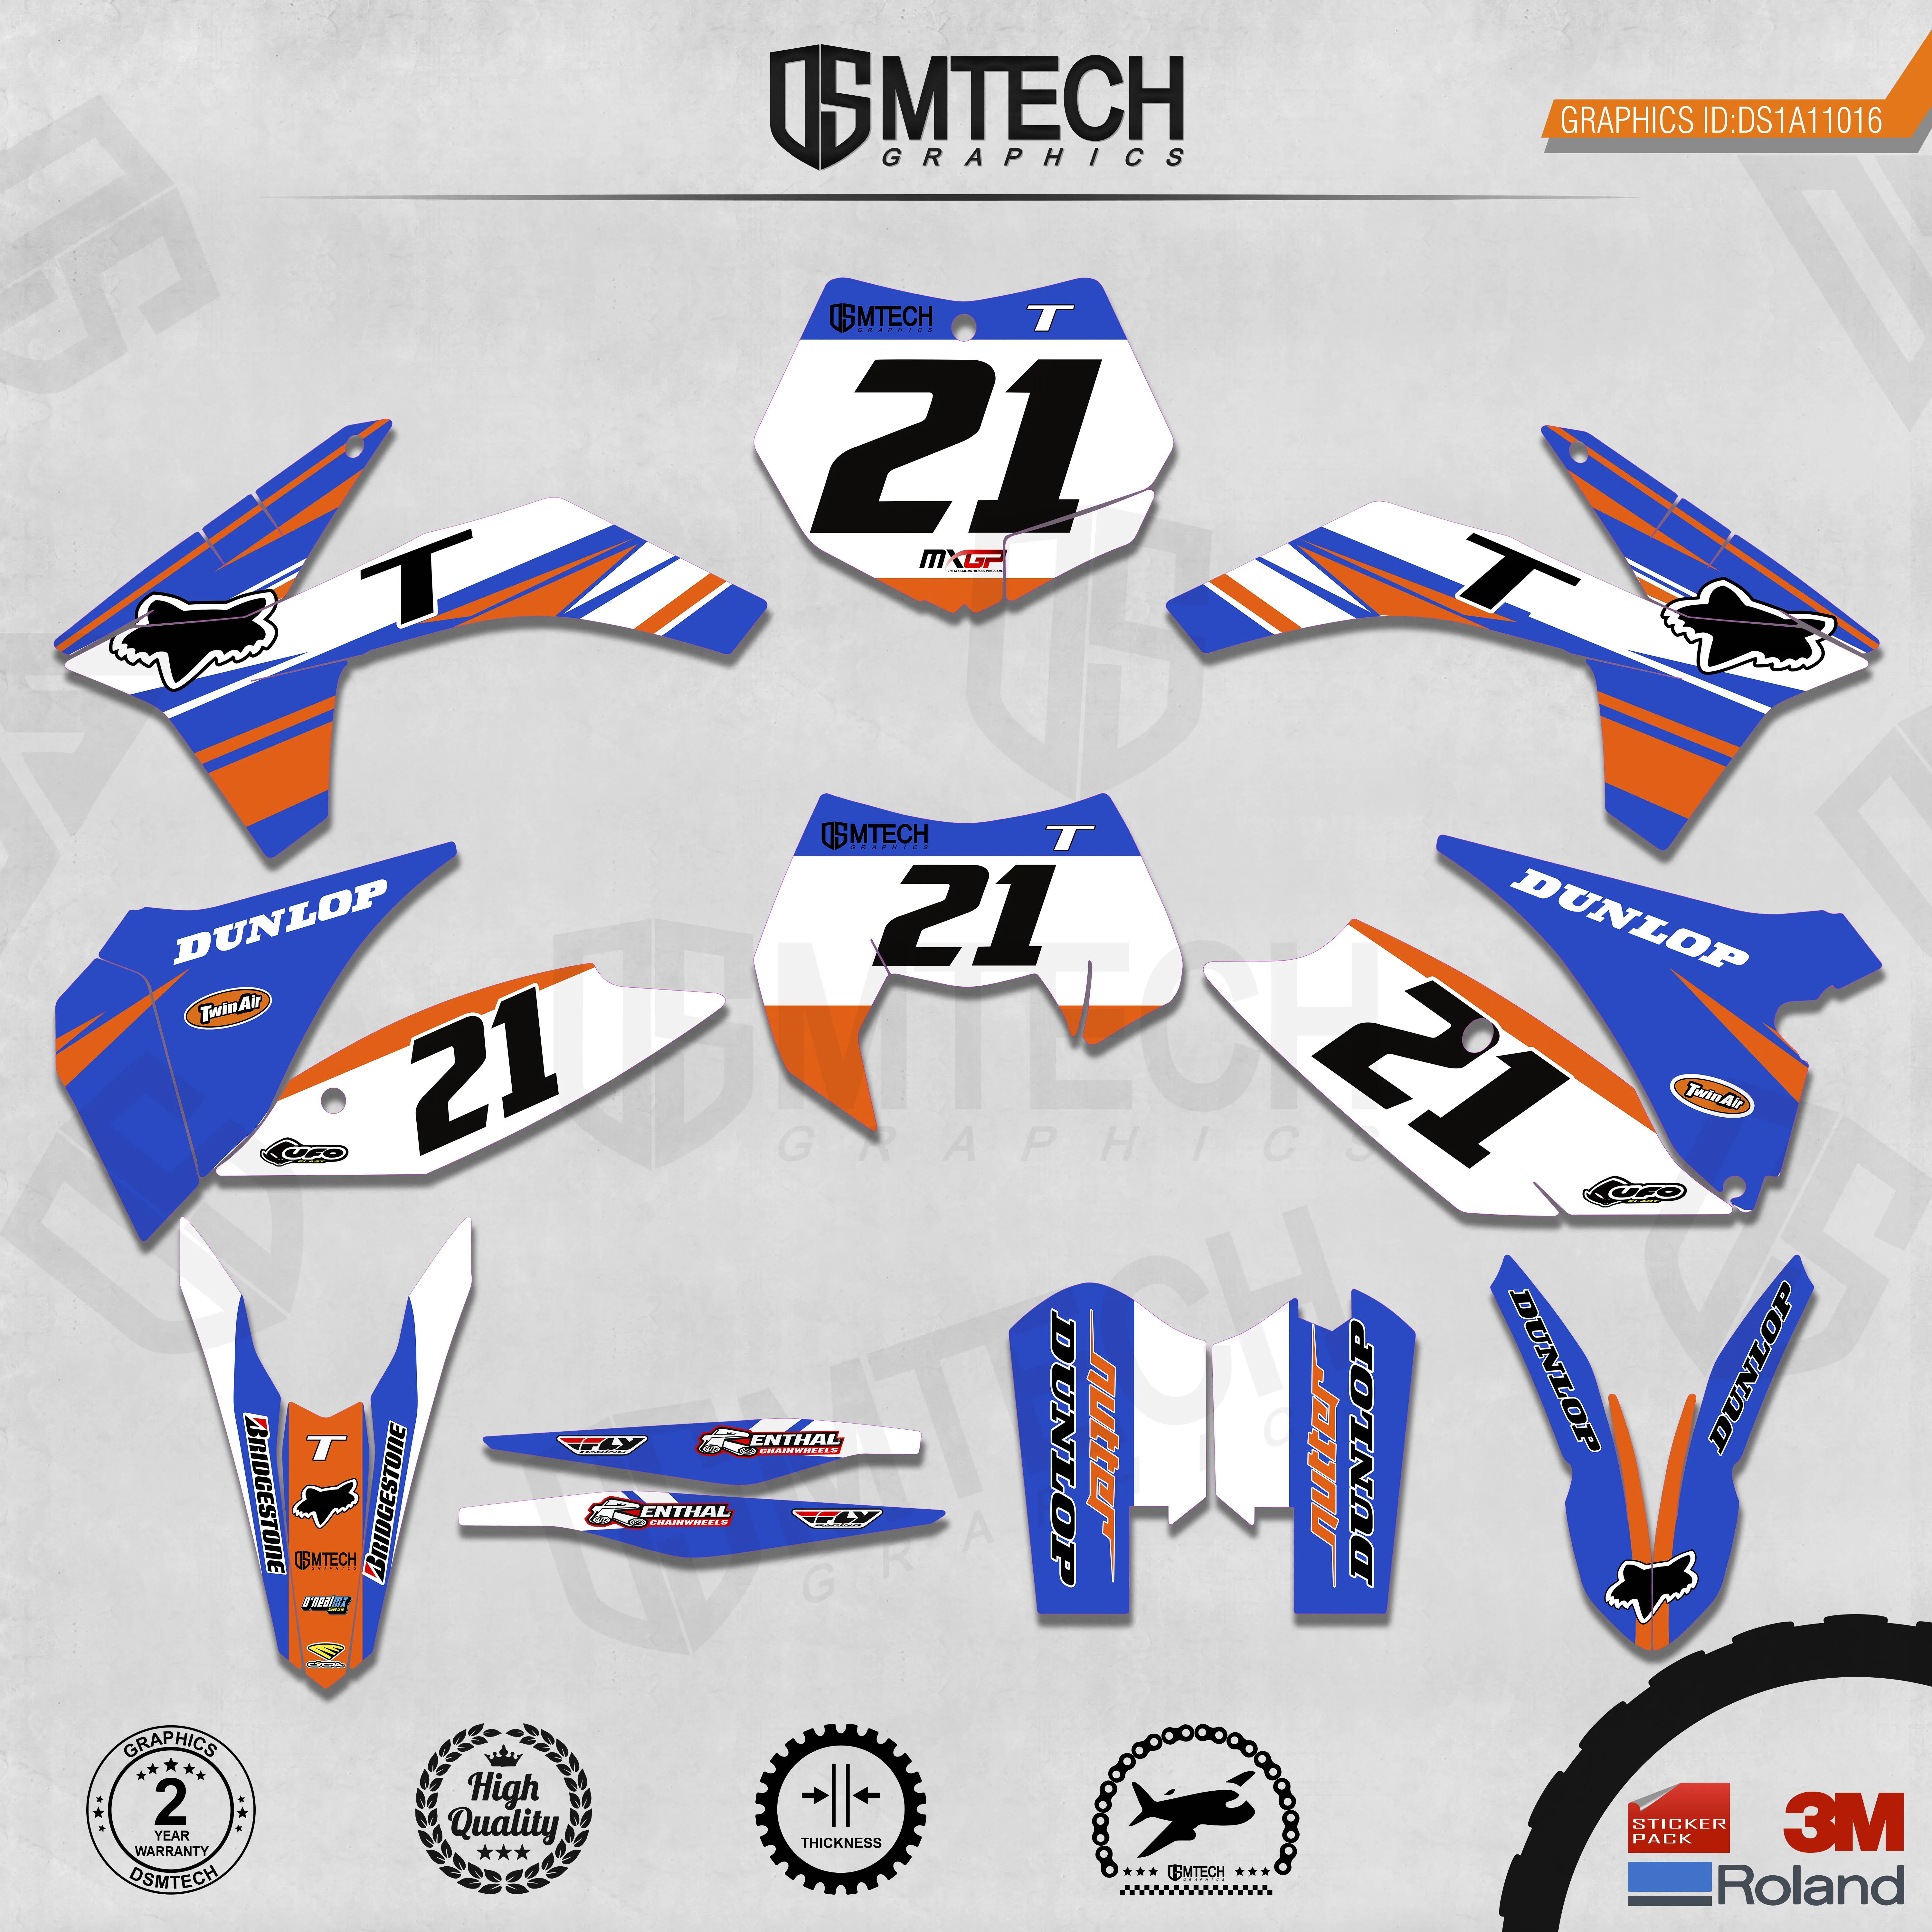 DSMTECH Customized Team Graphics Backgrounds Decals 3M Custom Stickers For  2011-2012 SXF  2012-2013EXC  016